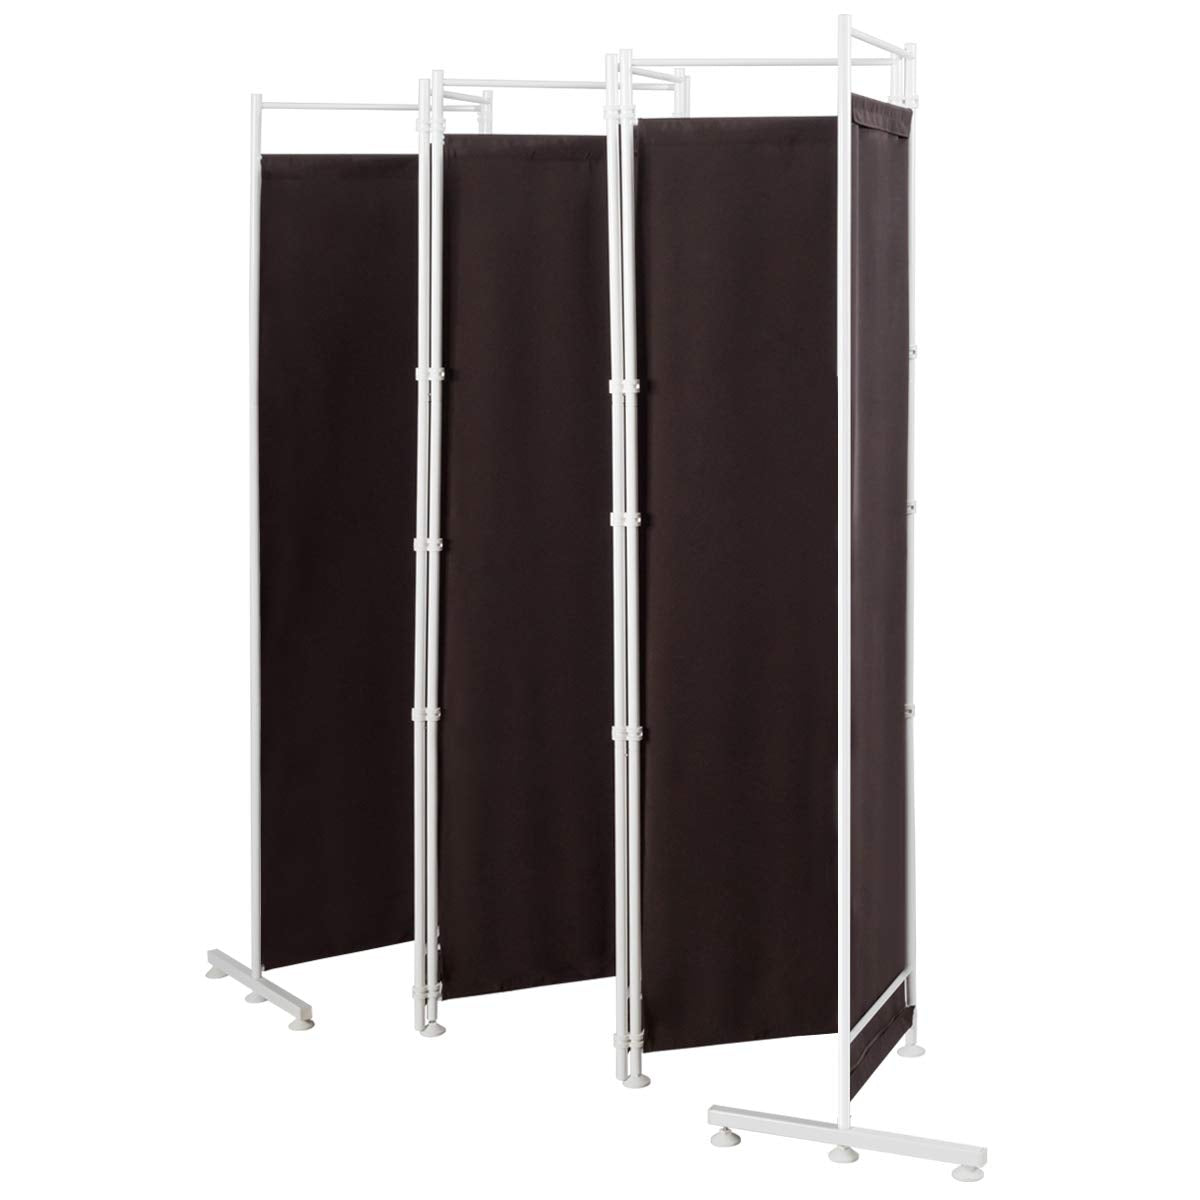 Giantex 6 Panel Room Divider, 6 Ft Folding Screen with Steel Support Base